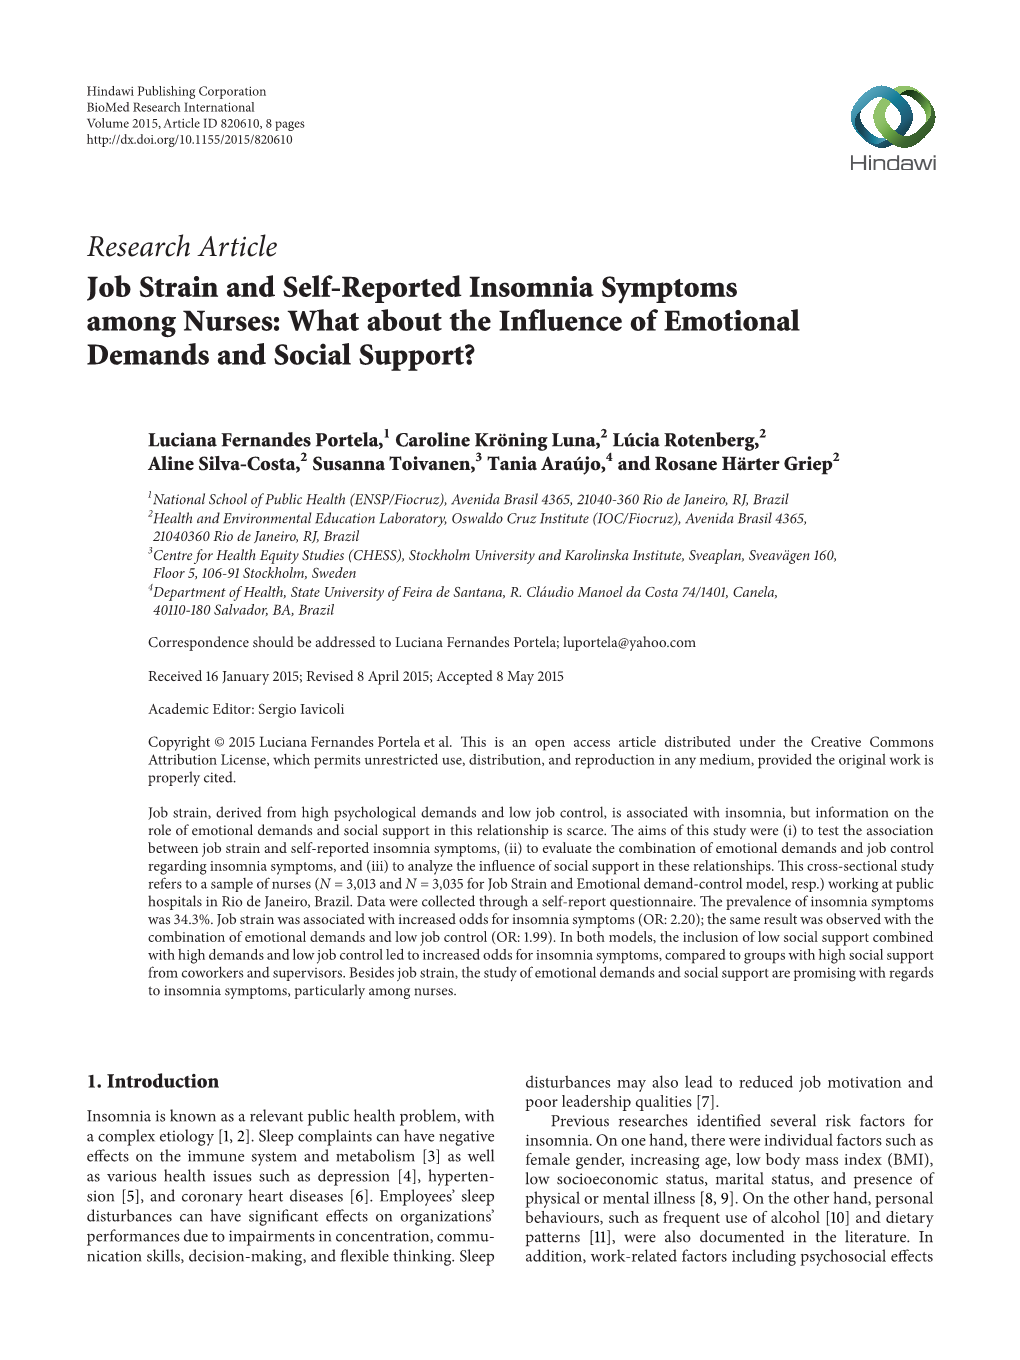 Job Strain and Self-Reported Insomnia Symptoms Among Nurses: What About the Influence of Emotional Demands and Social Support?